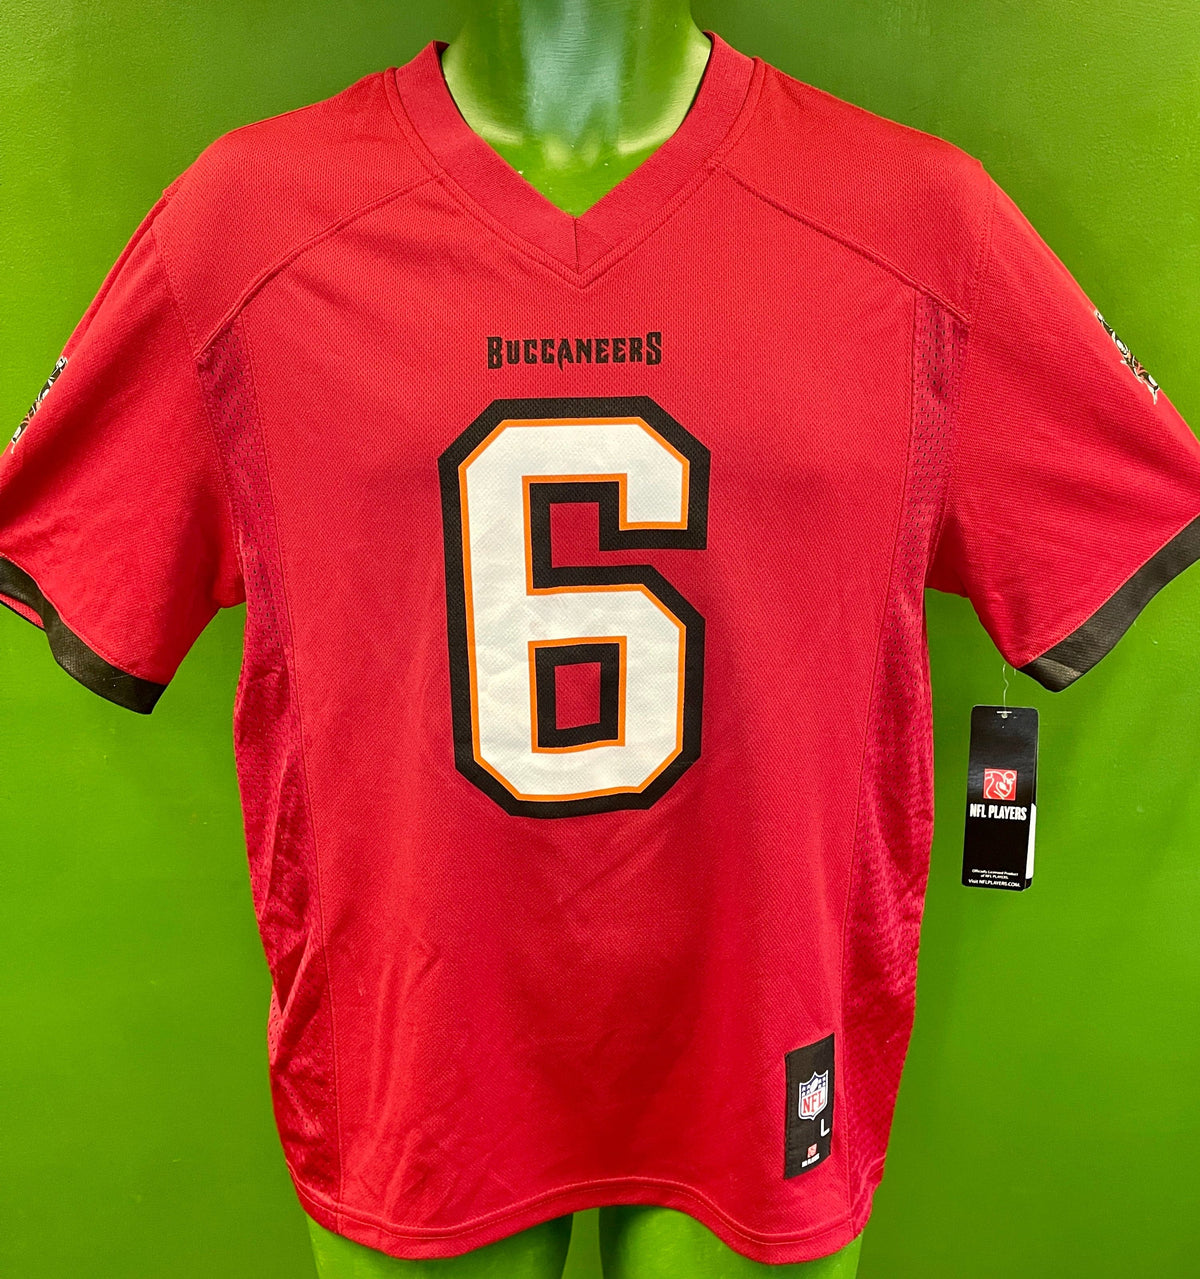 NFL Tampa Bay Buccaneers Baker Mayfield #6 Jersey Youth Medium 10-12 NWT